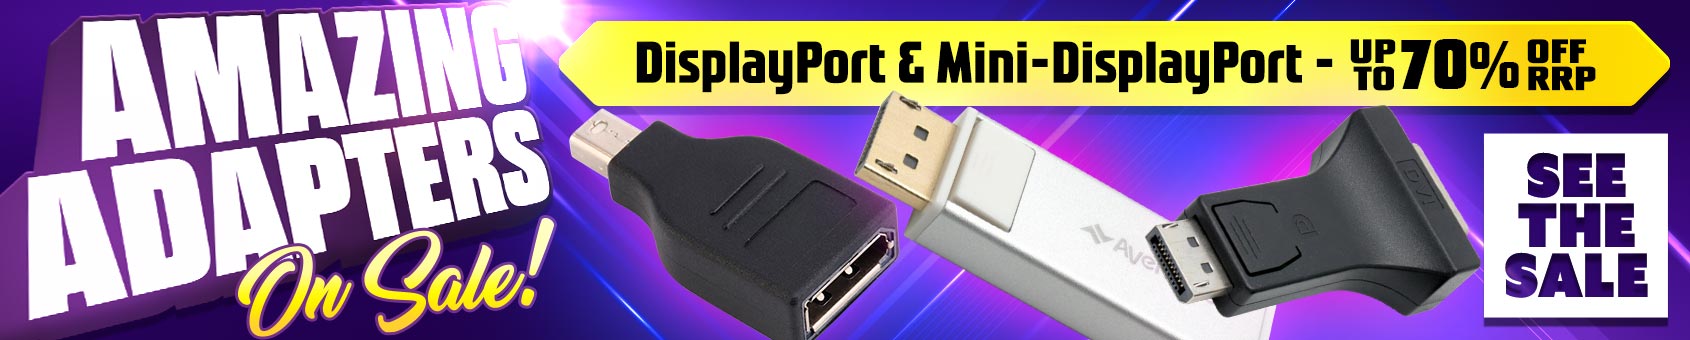 Our BIGGEST SALE EVER on Analogue DISPLAYPORT Adapters during April!!!